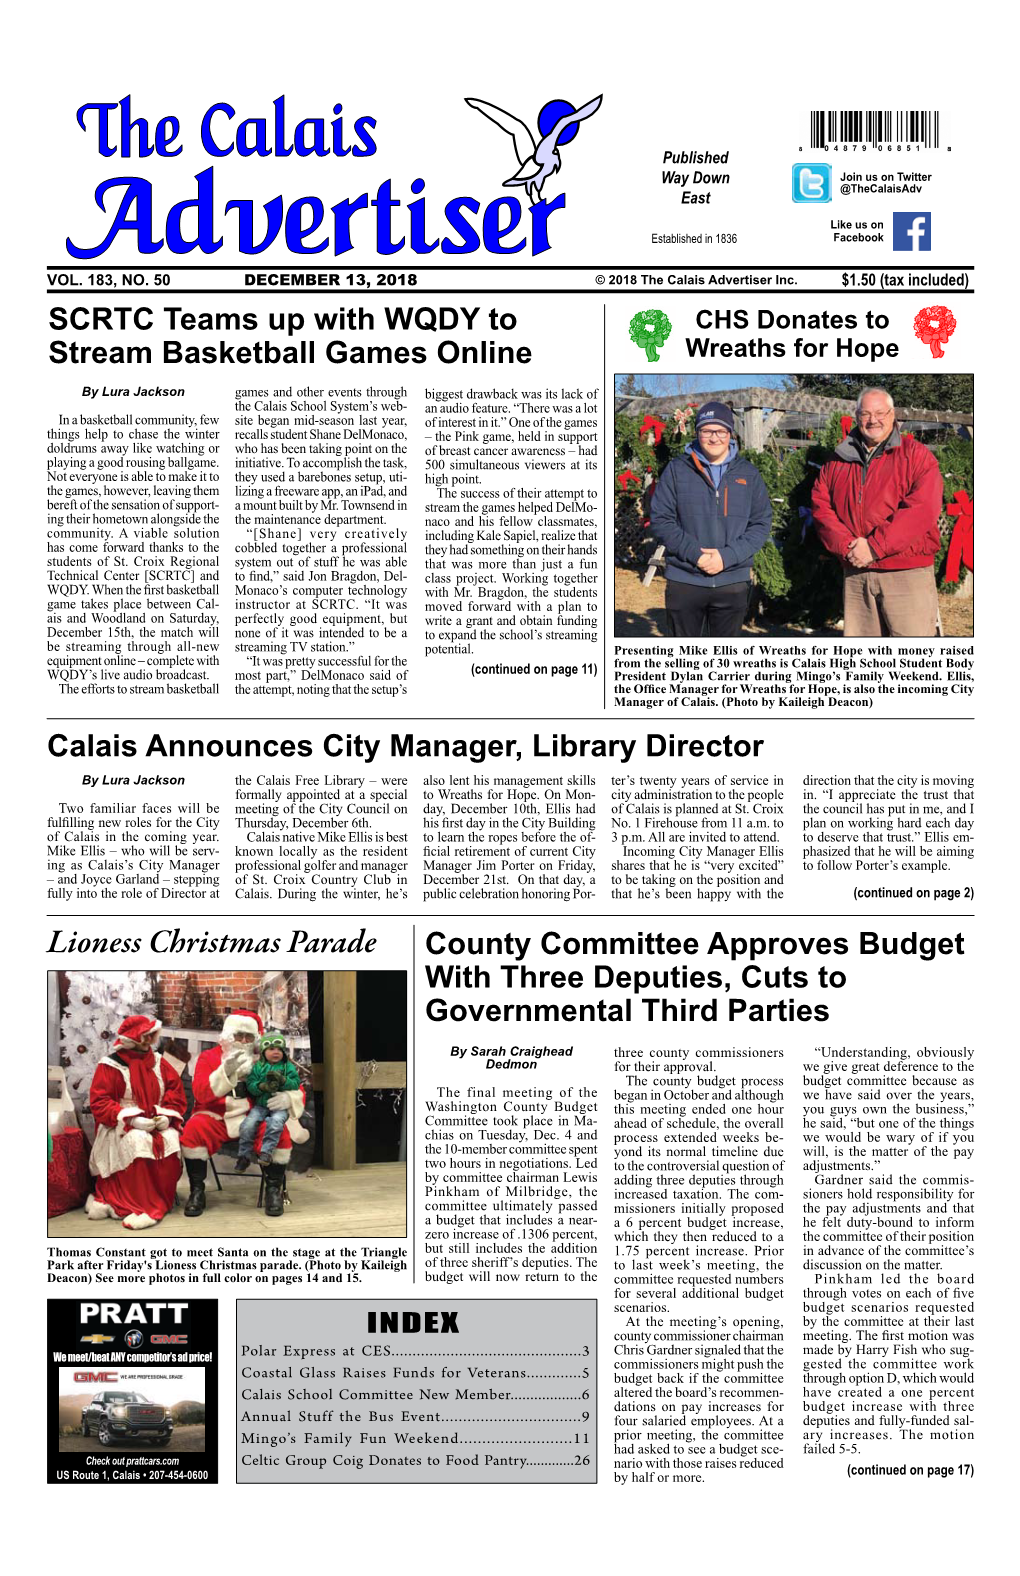 Lioness Christmas Parade County Committee Approves Budget with Three Deputies, Cuts to Governmental Third Parties